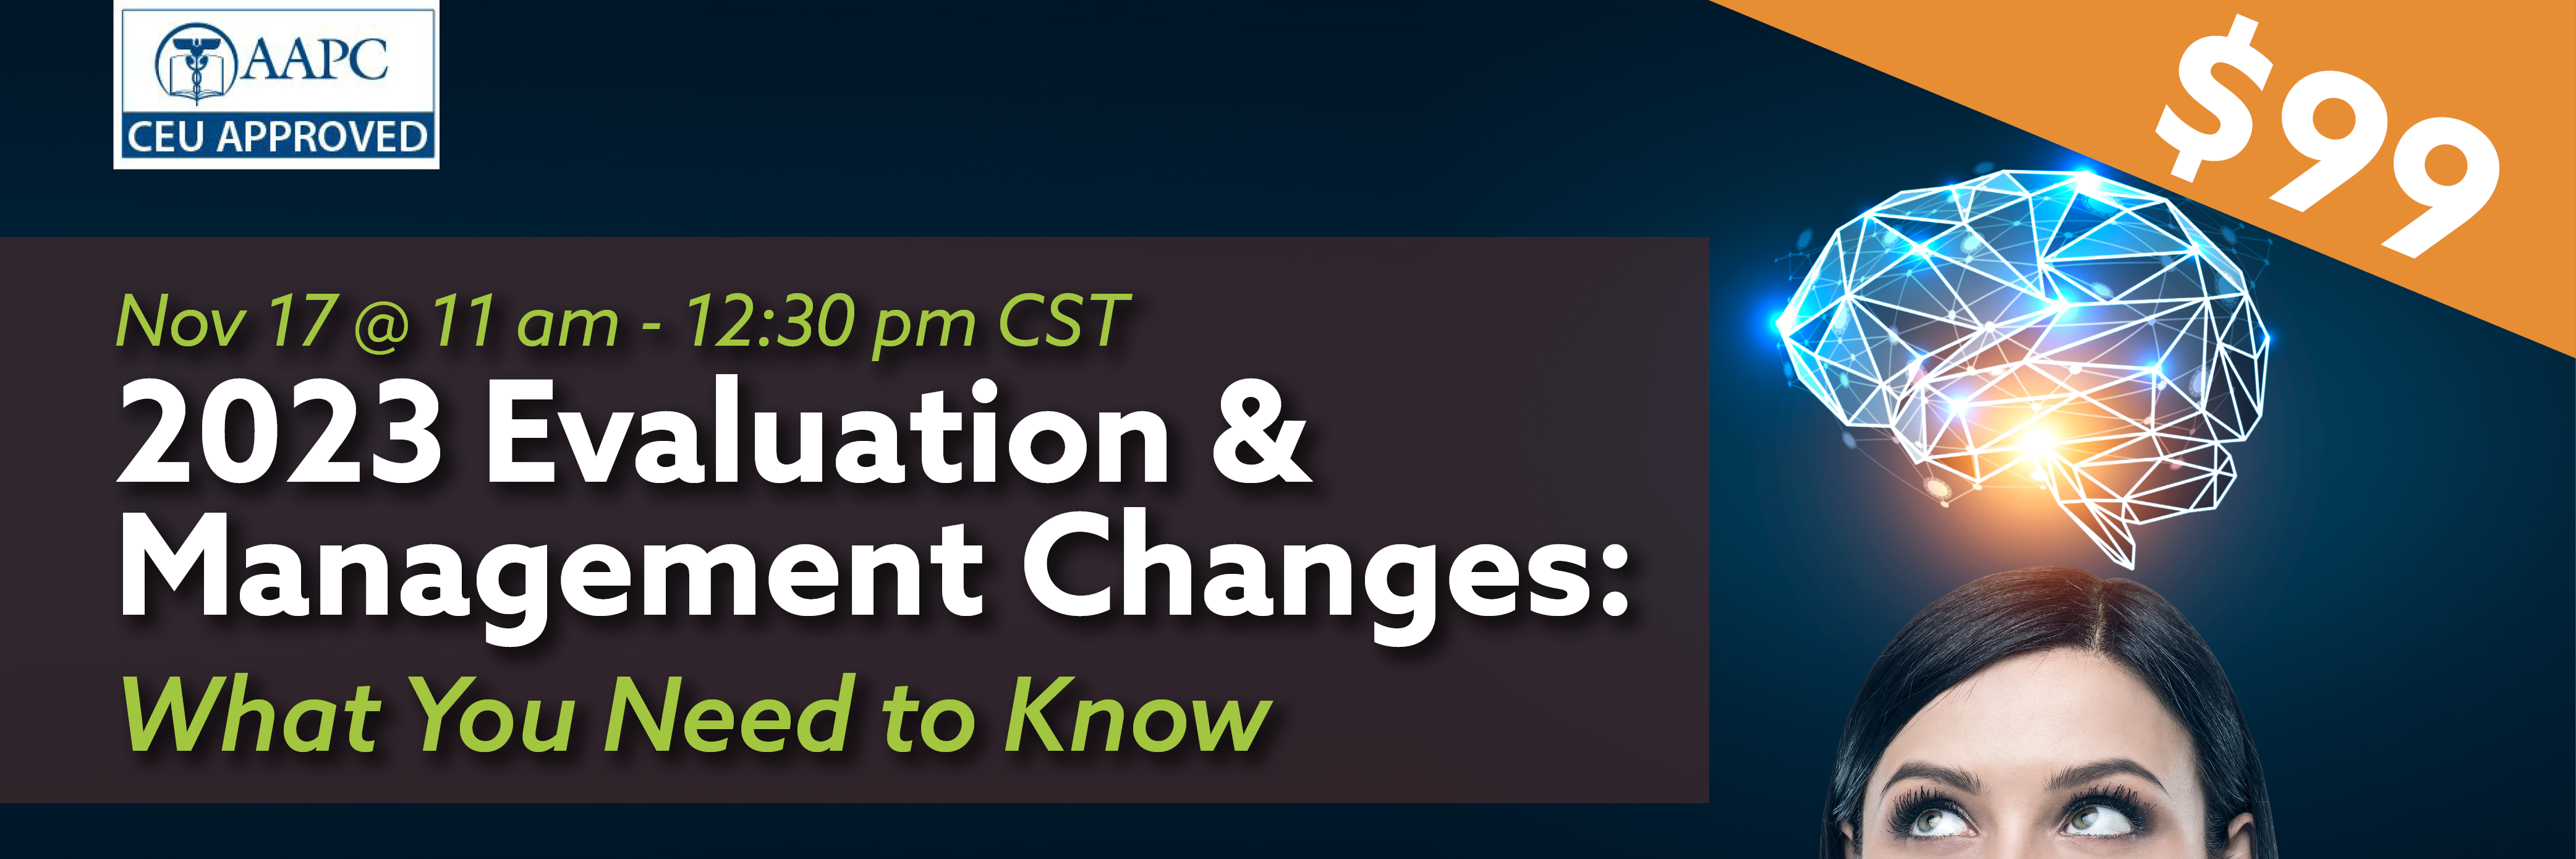 Nov 17 @ 11 am - 12:30 pm CST, 2023 Evaluation & Management Changes: What you Need to Know